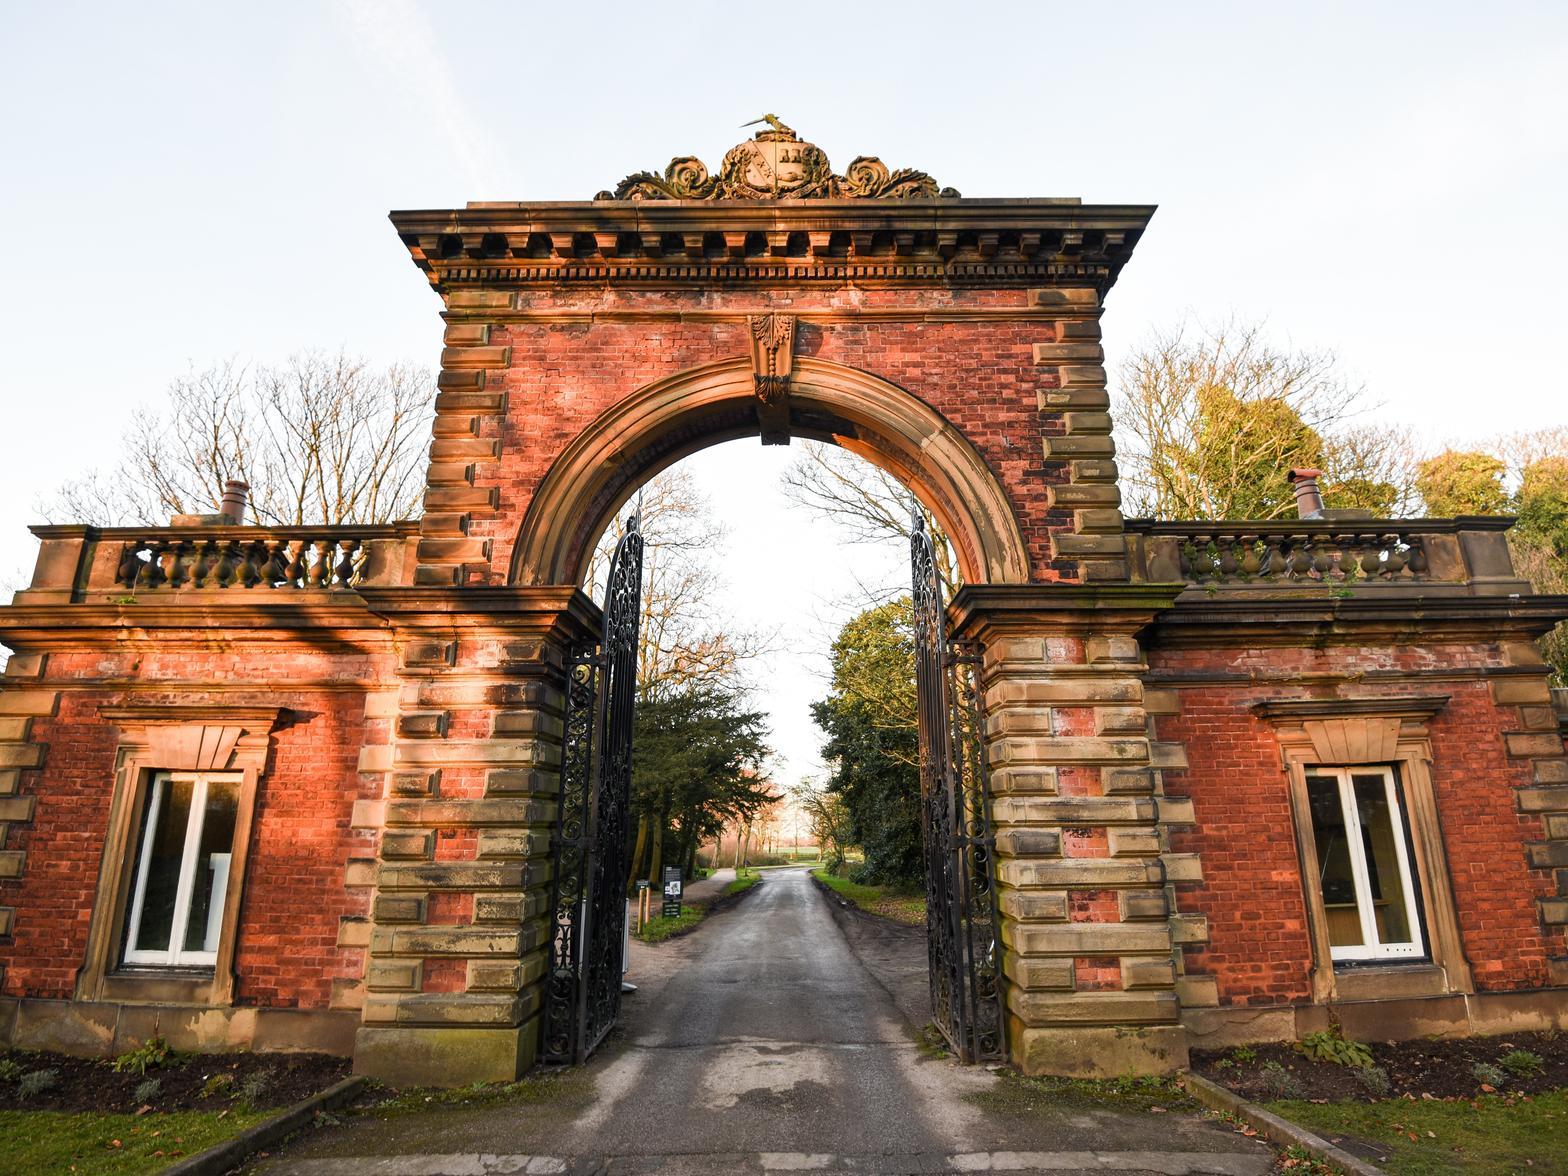 Entrance archway with integral lodges. Probably 1840s, originally sited adjacent to the (former) Estate Office in Hastings Place and removed to this site after that approach to the Hall was interrupted by the Lytham-Blackpool Railway (1861-3)